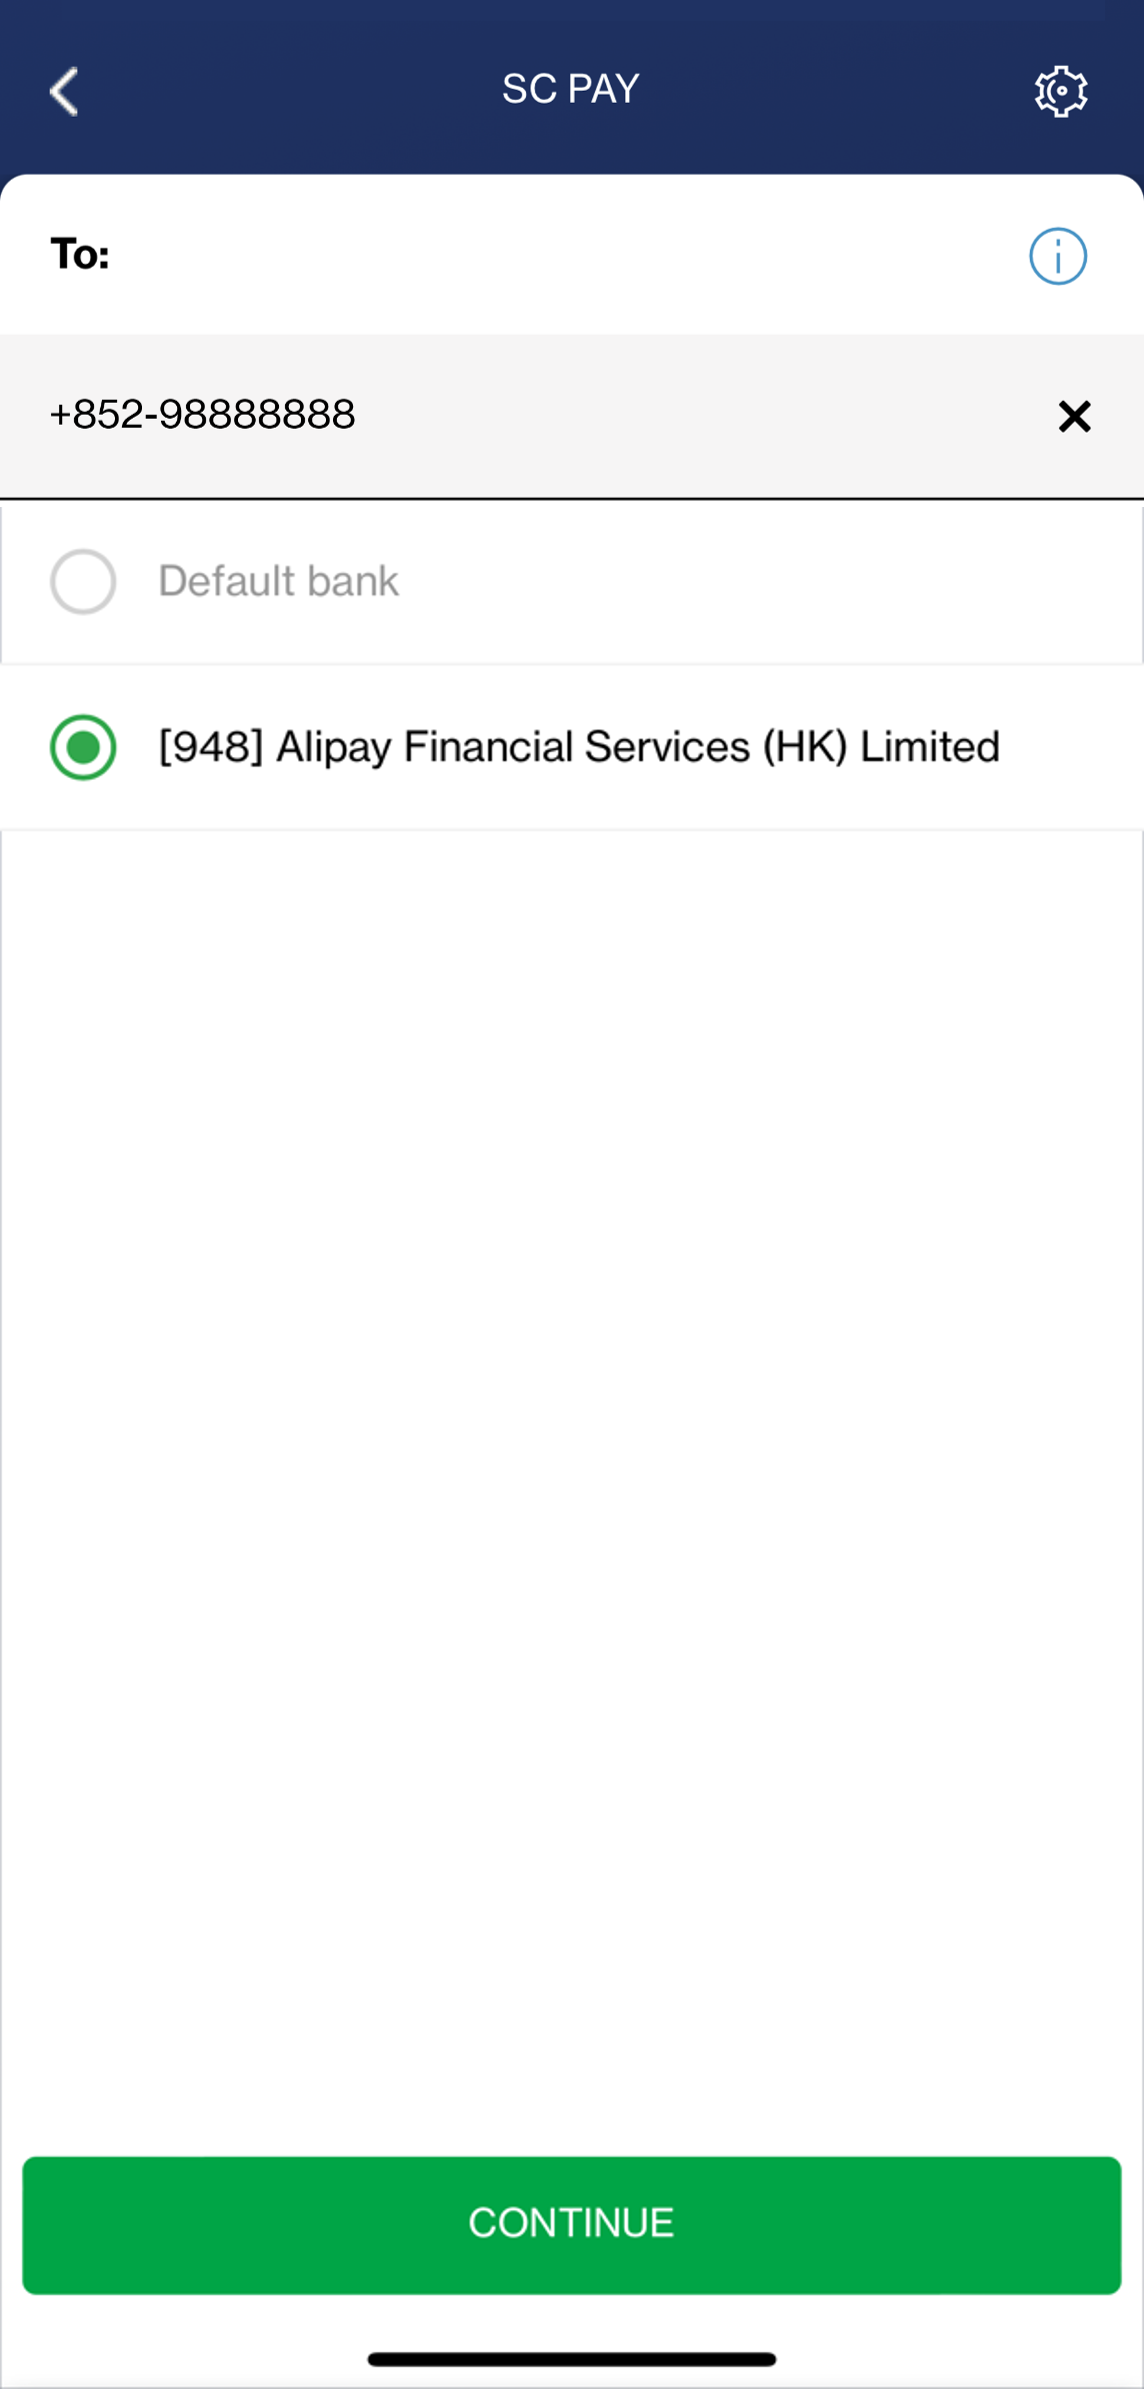 Input the FPS-registered Hong Kong mobile number with AlipayHK as in Step 1. If AlipayHK is the FPS default recipient, please choose “Default bank”. Otherwise, please select “Specific bank” then “[948] AlipayHK Financial Services (HK) Limited”.